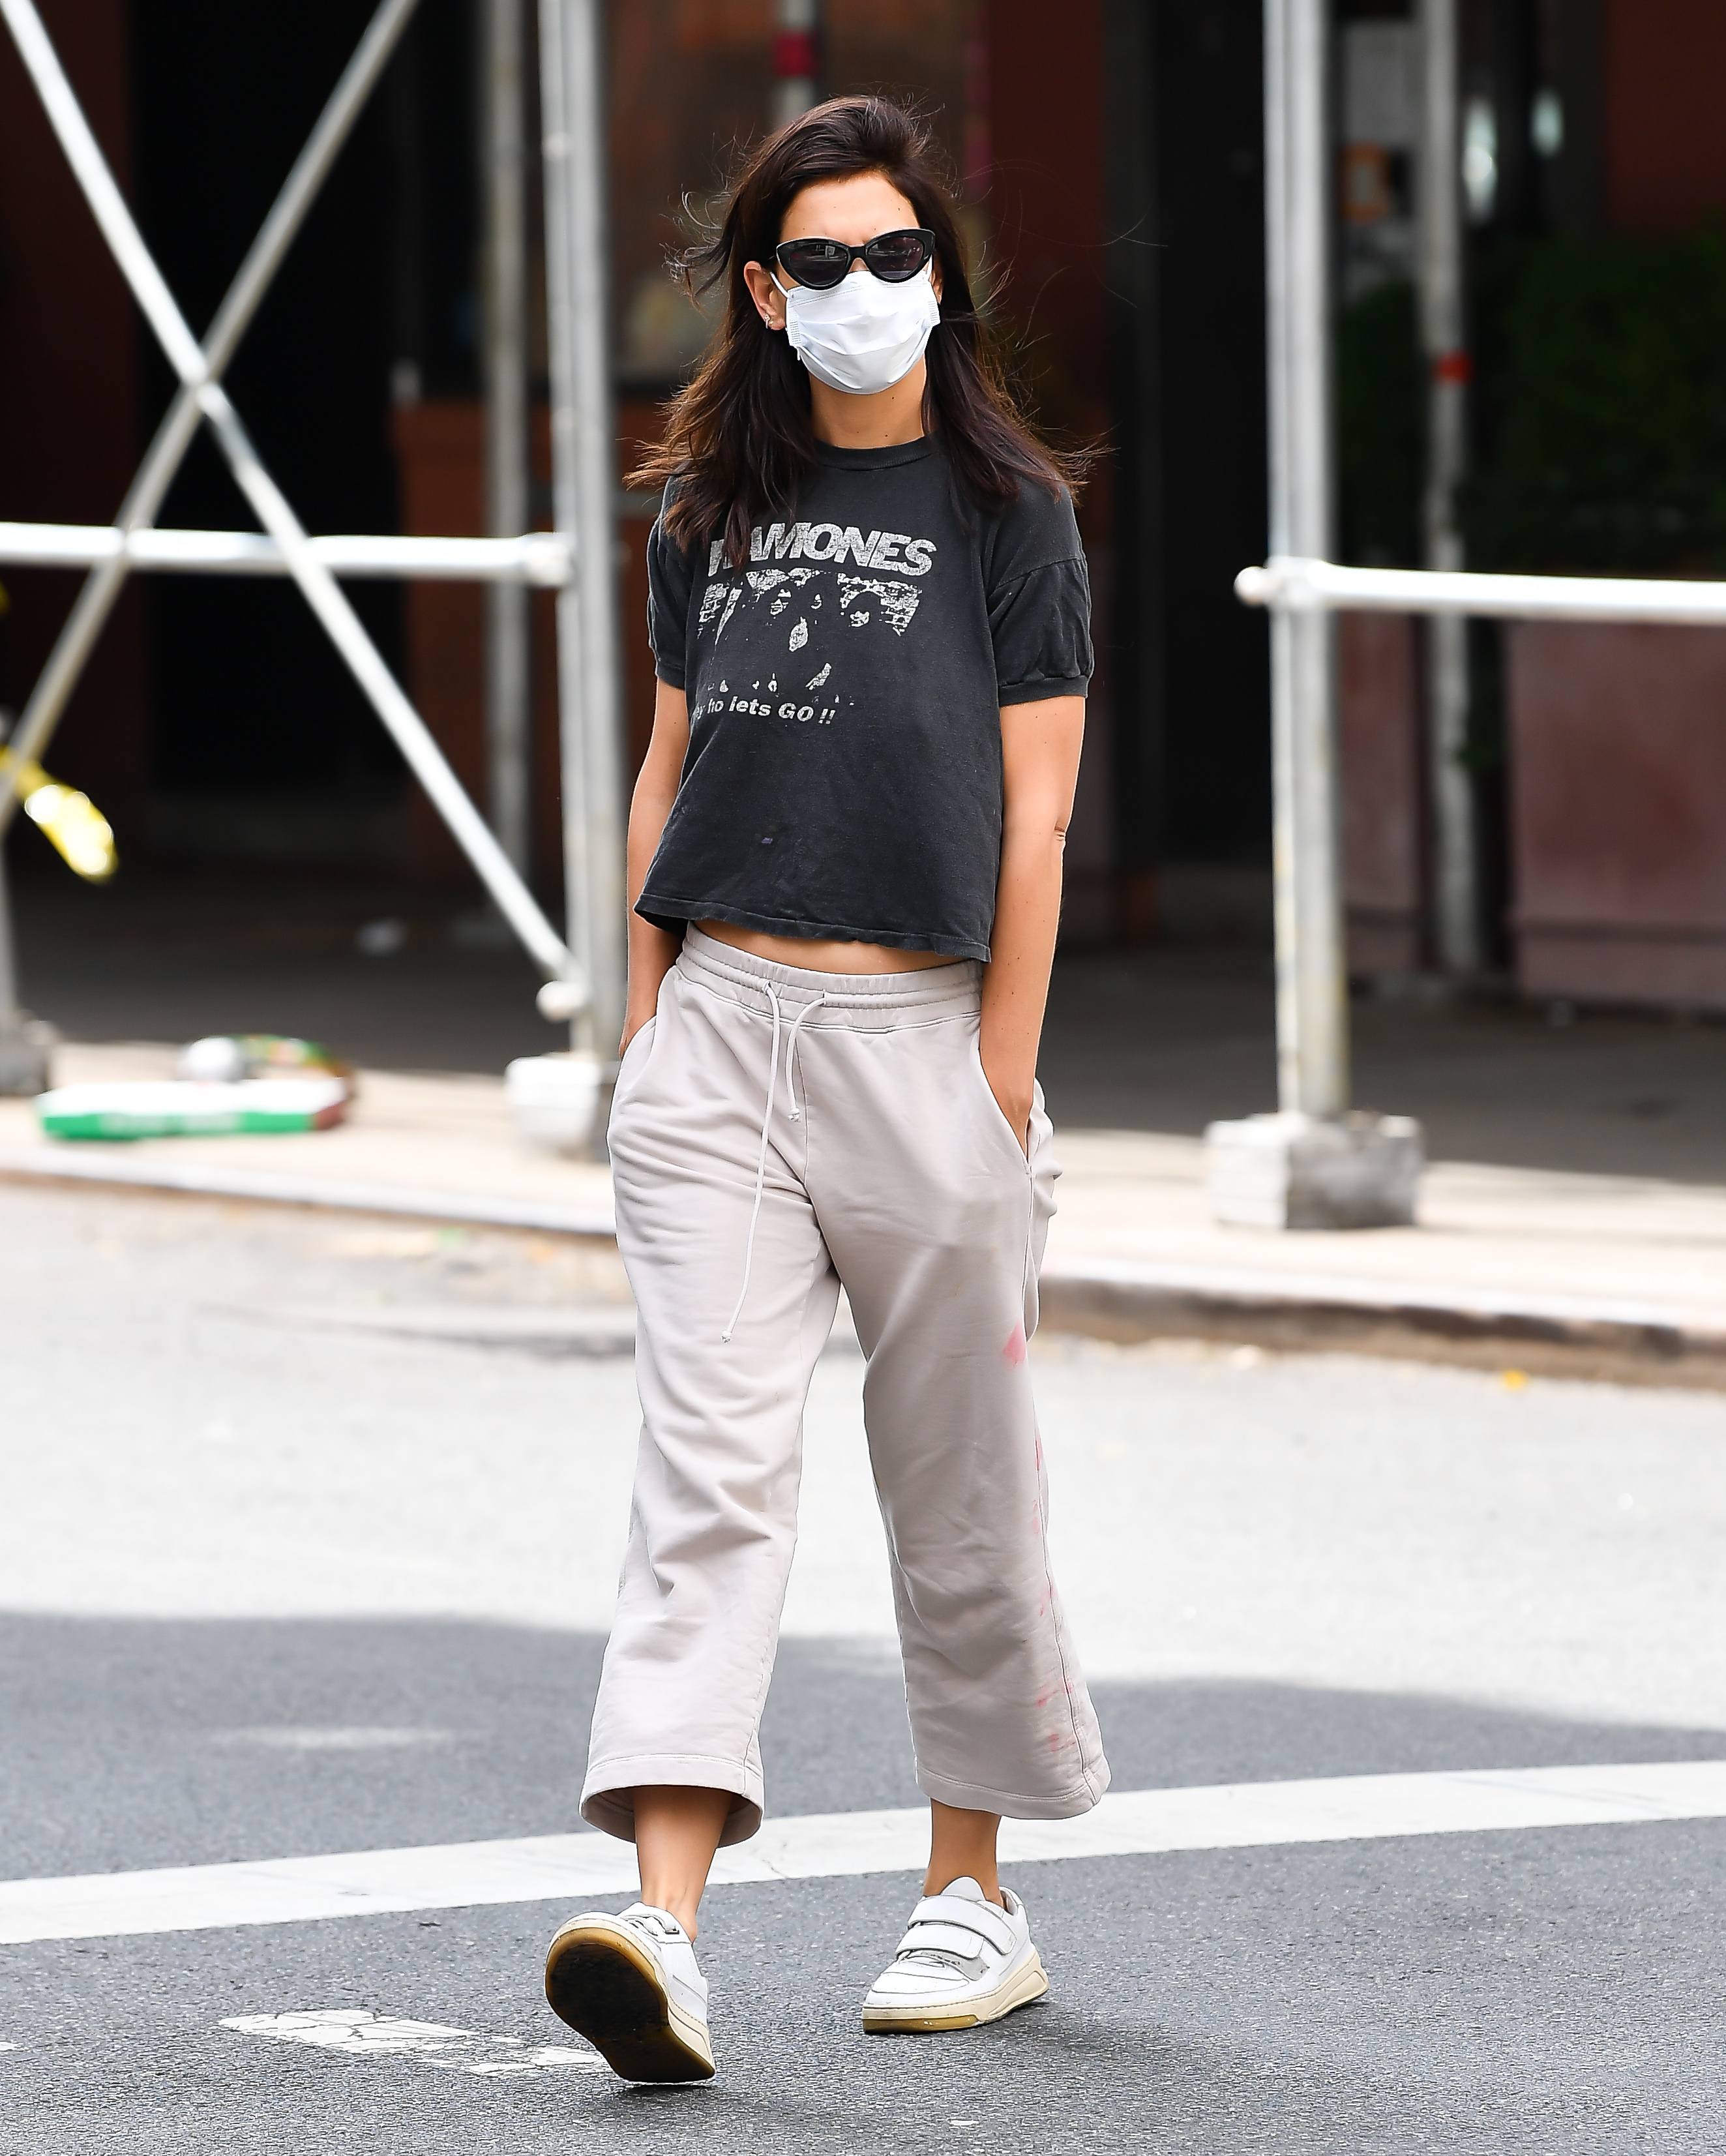 Katie Holmes wanted to go unnoticed while taking a walk through the streets of New York: the actress wore gray pants, a black printed shirt, a mask and sunglasses (Photos: The Grosby Group)